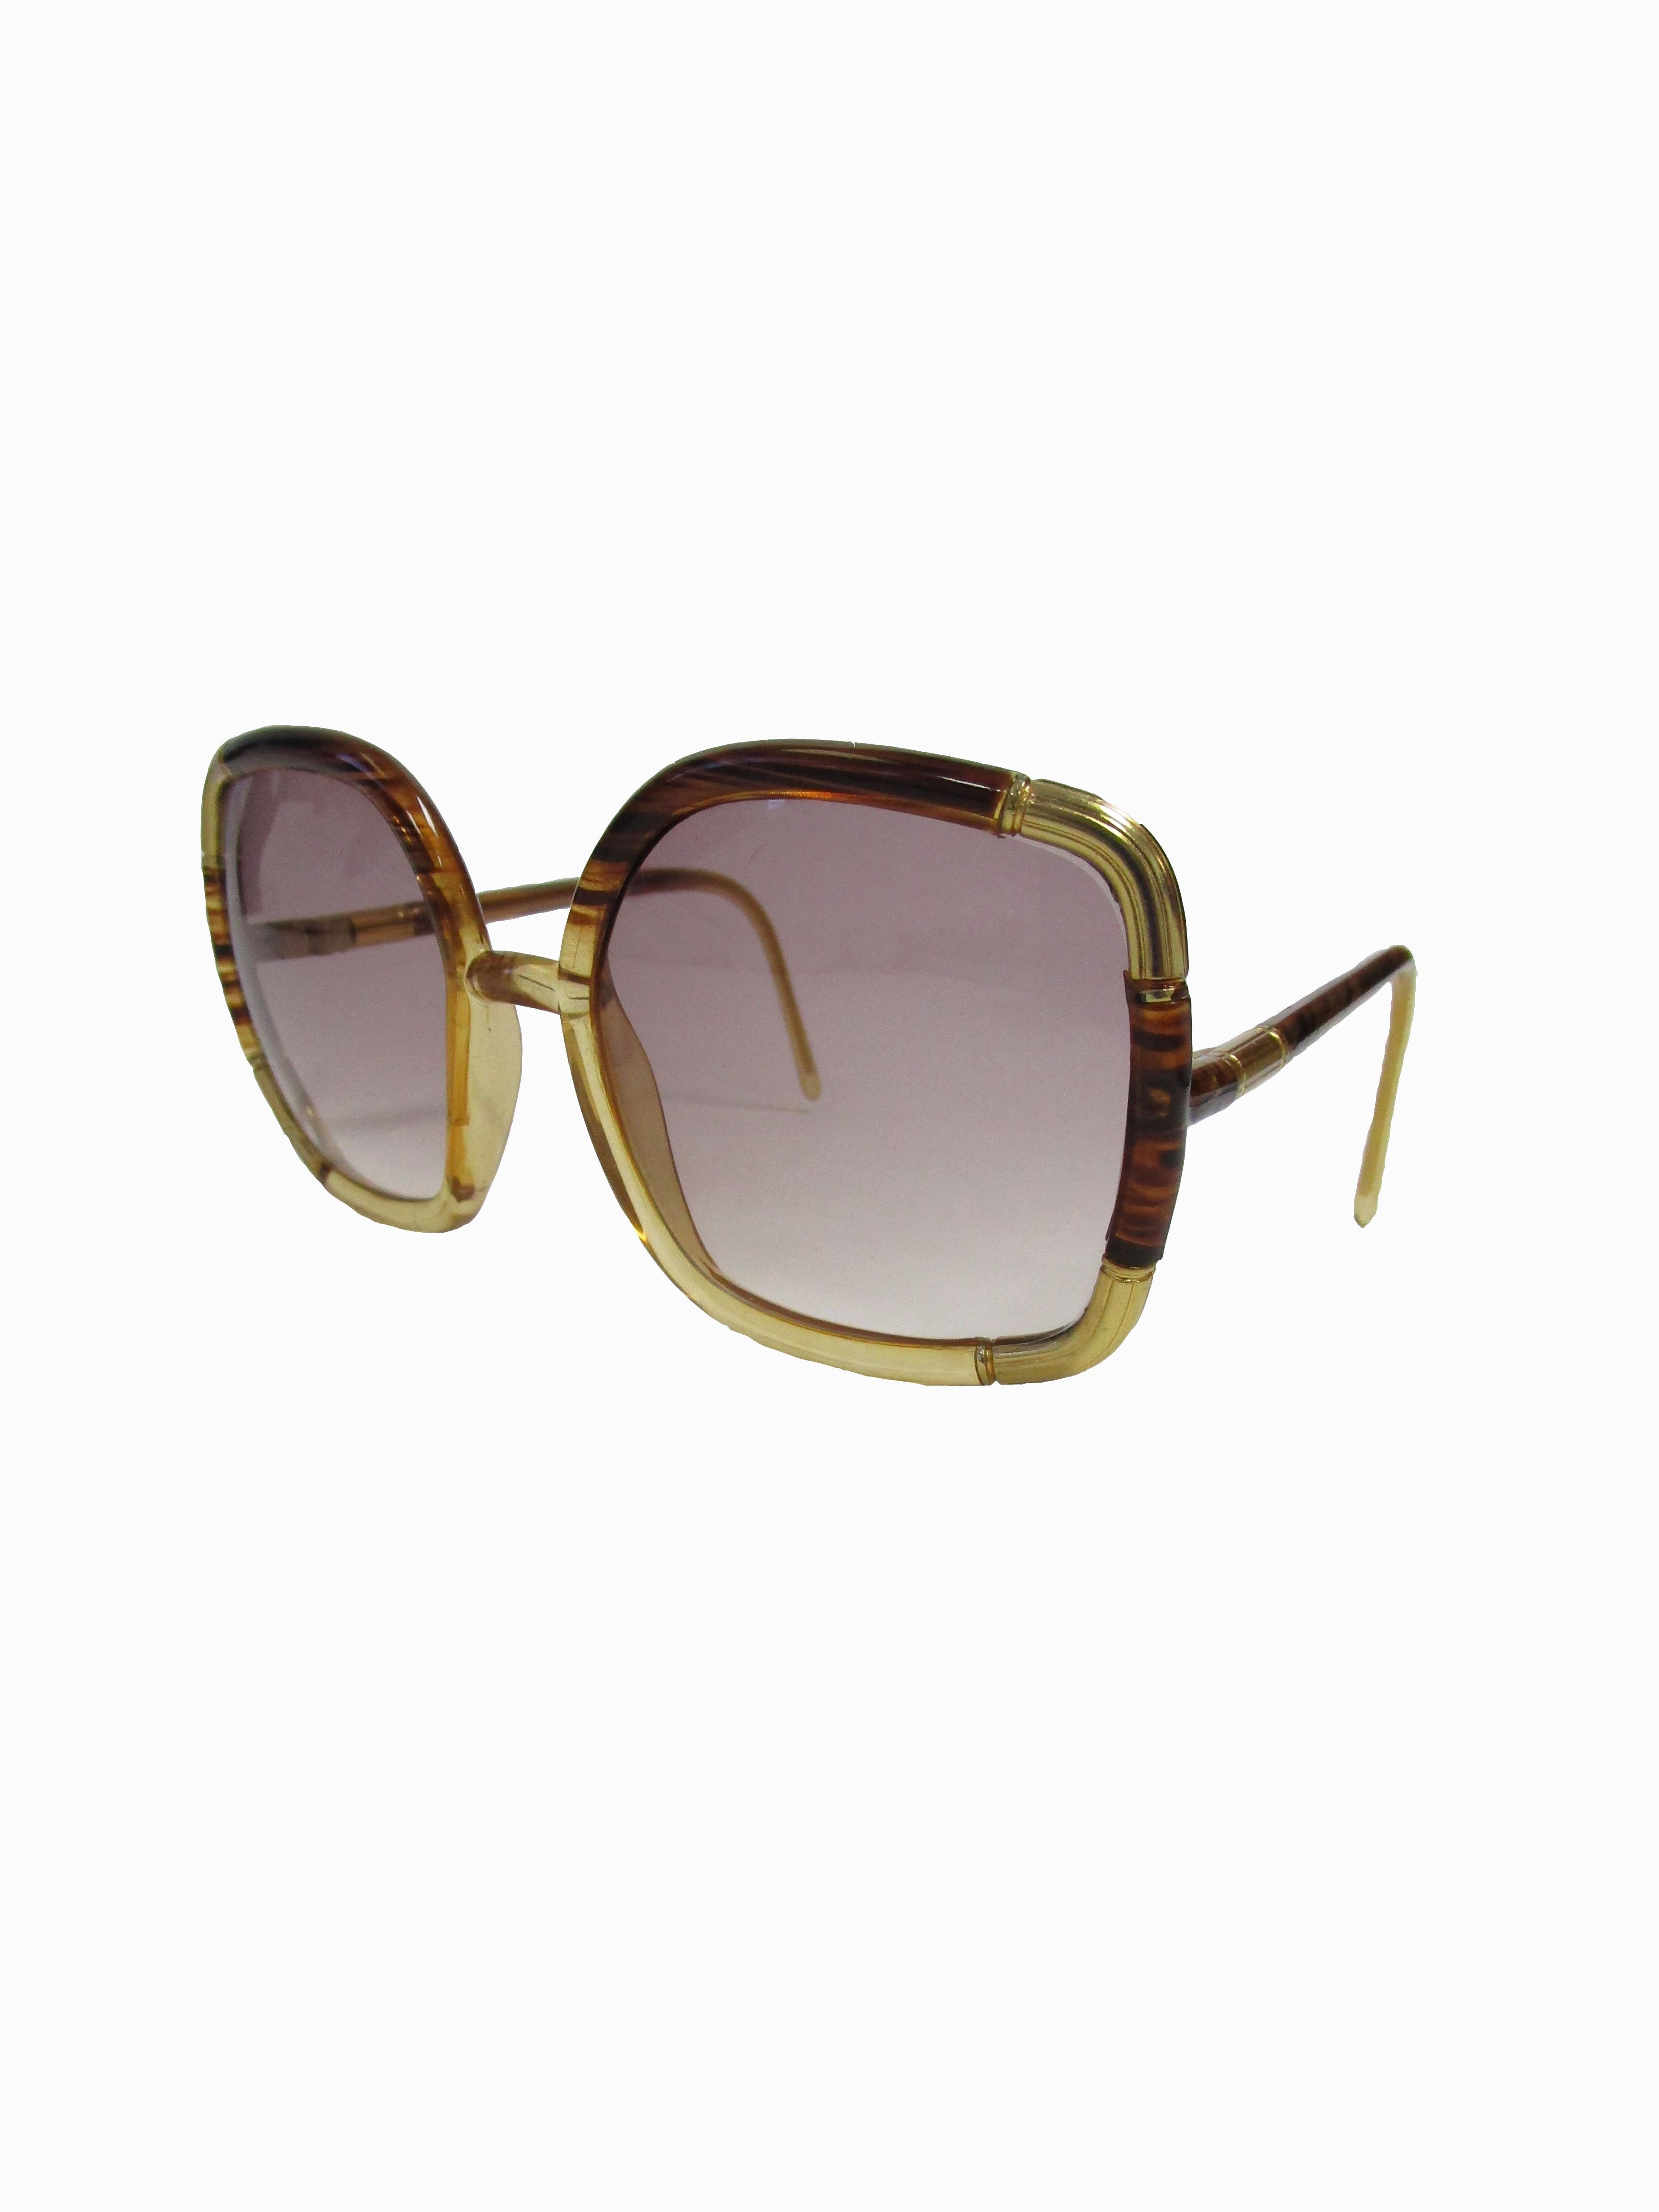 
Classic Ted Lapidus sunglasses in a tortoise acrylic with gold accents and dusky lenses.

Lens Width-57mm
Bridge Width- 15mm
Temple (arm) Length - 149mm